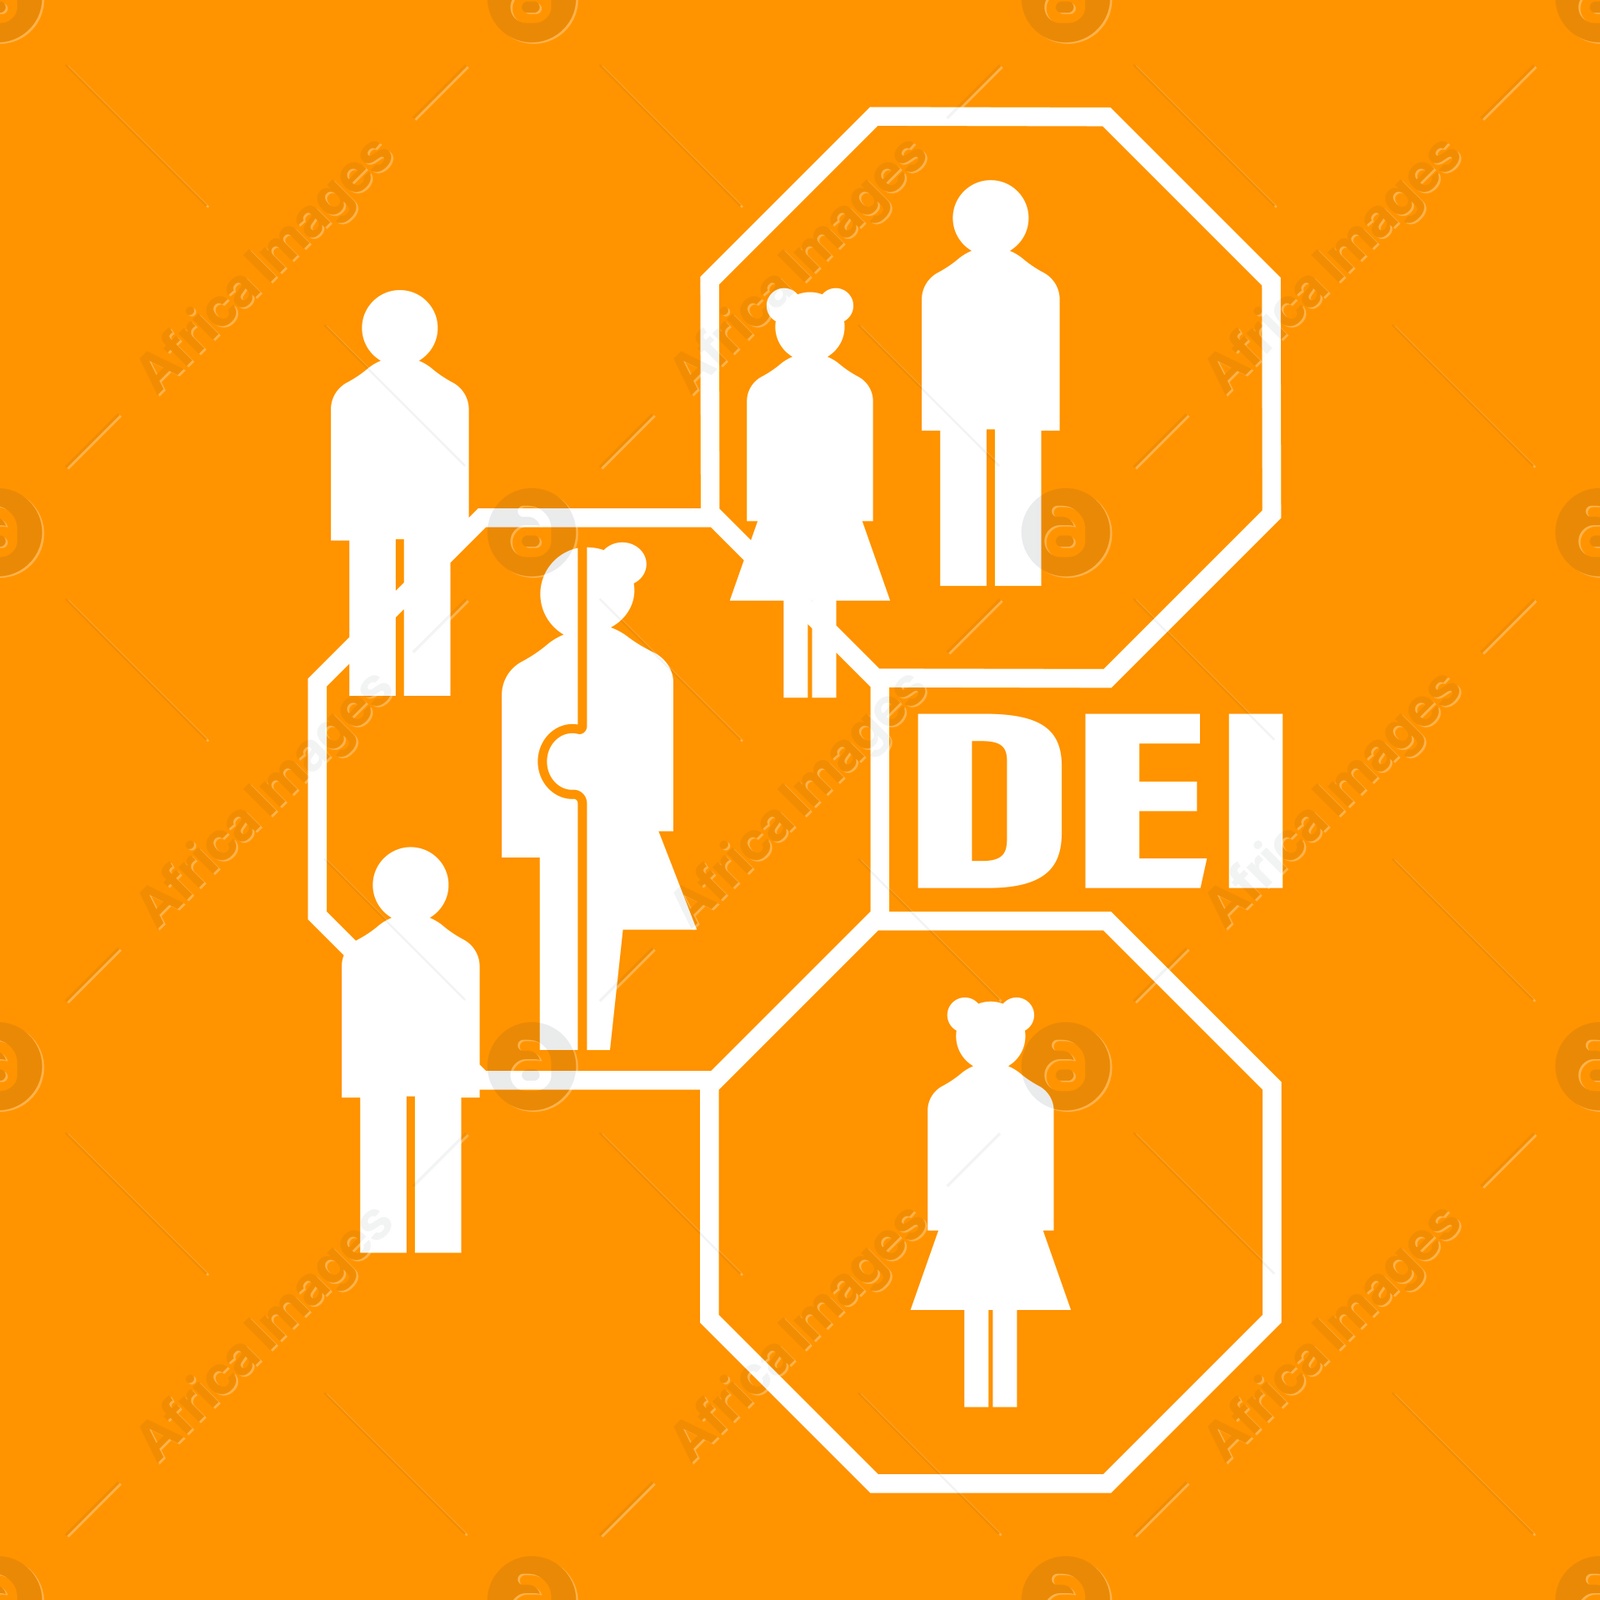 Illustration of Concept of DEI - Diversity, Equality, Inclusion.  people and abbreviation on orange background